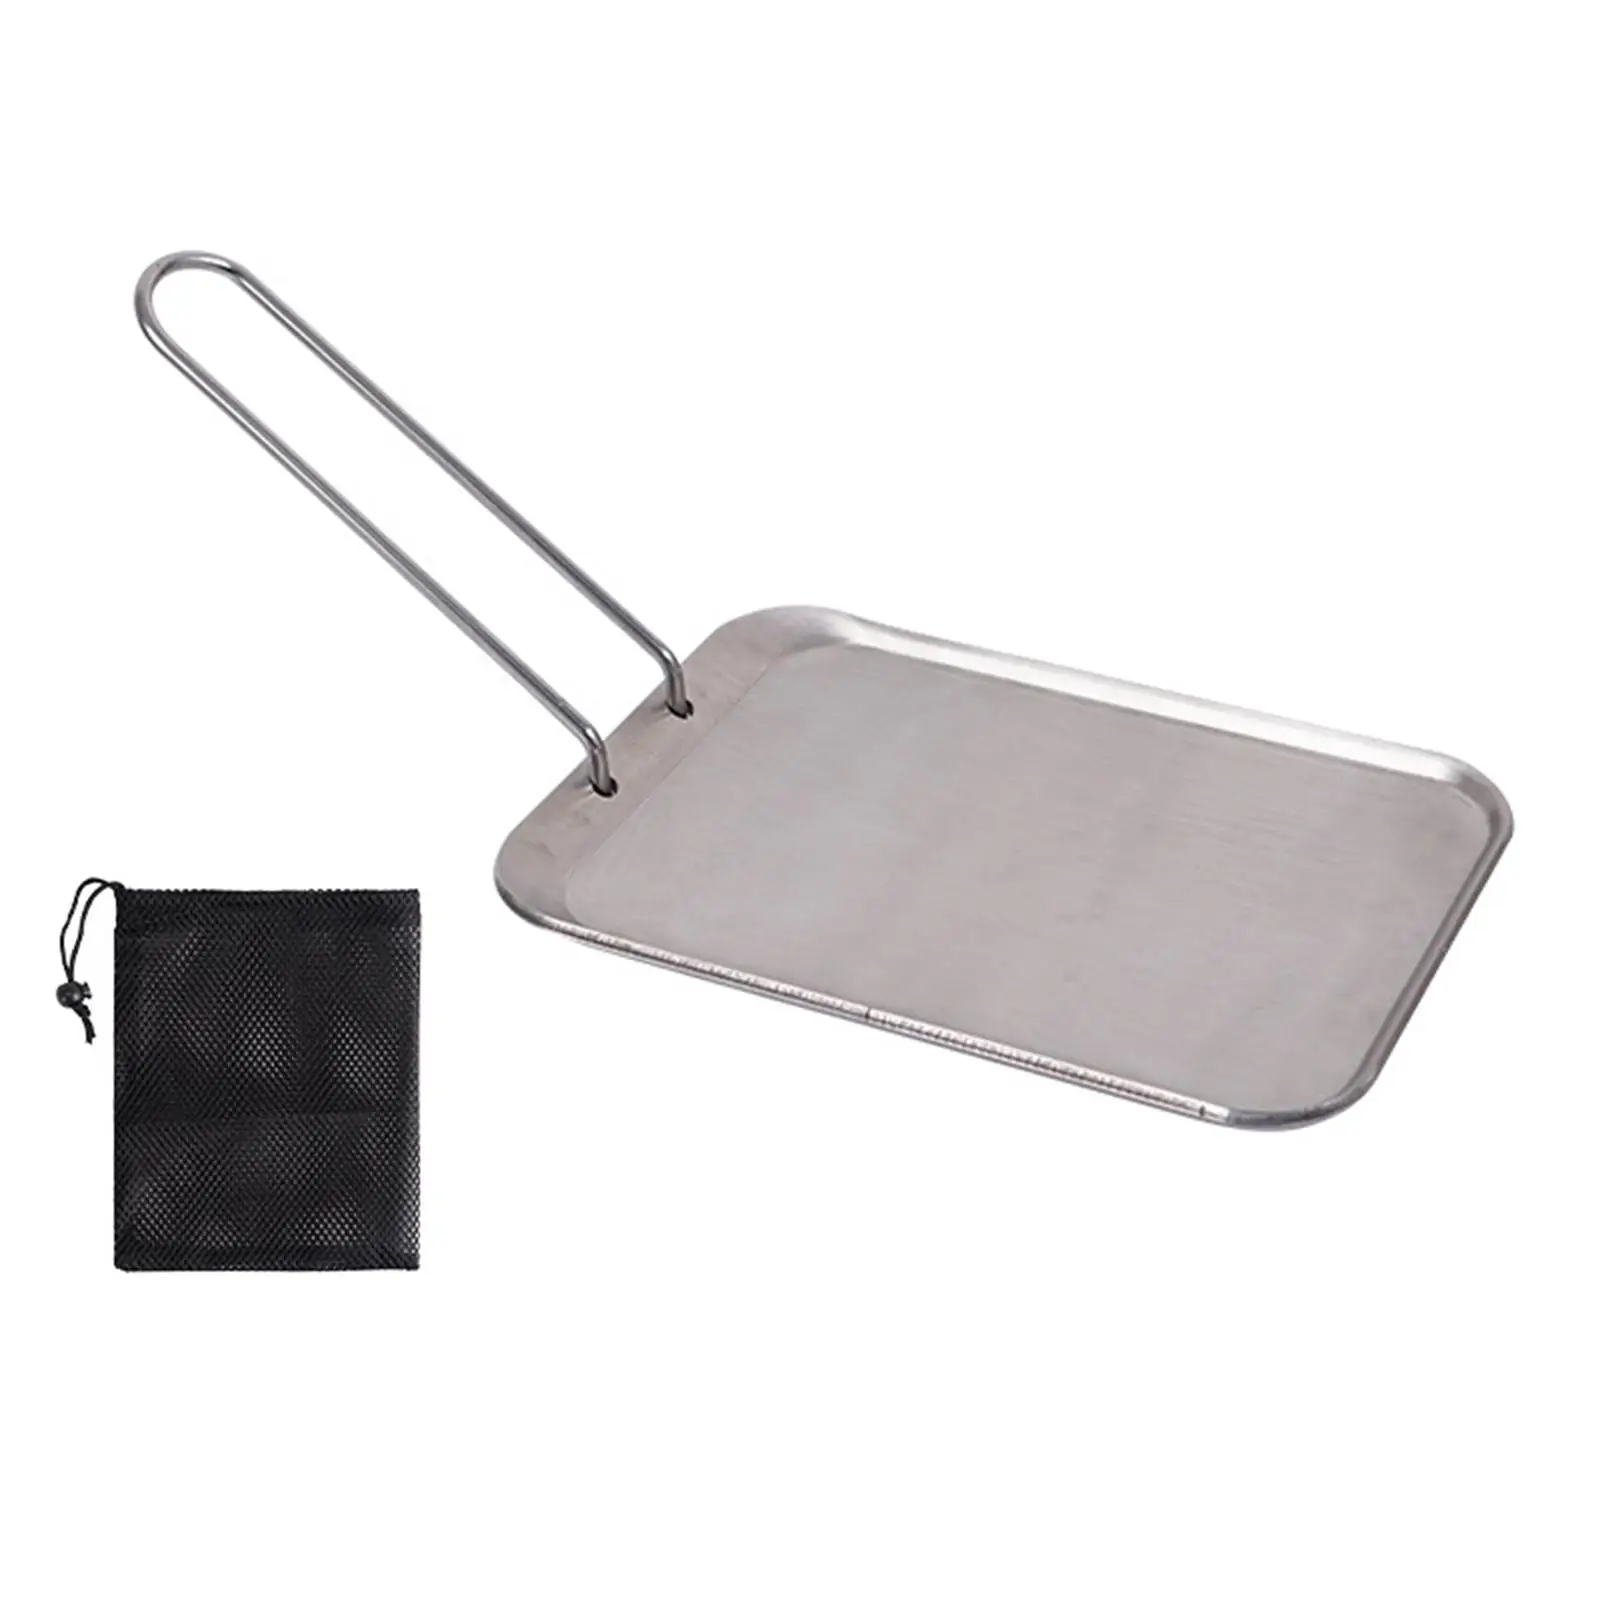 Frying Pan Griddle Stainless Steel Grilling Pan Skillet Sauteing Nonstick Tray Grill Pan for Cooking Baking BBQ Indoor Outdoor